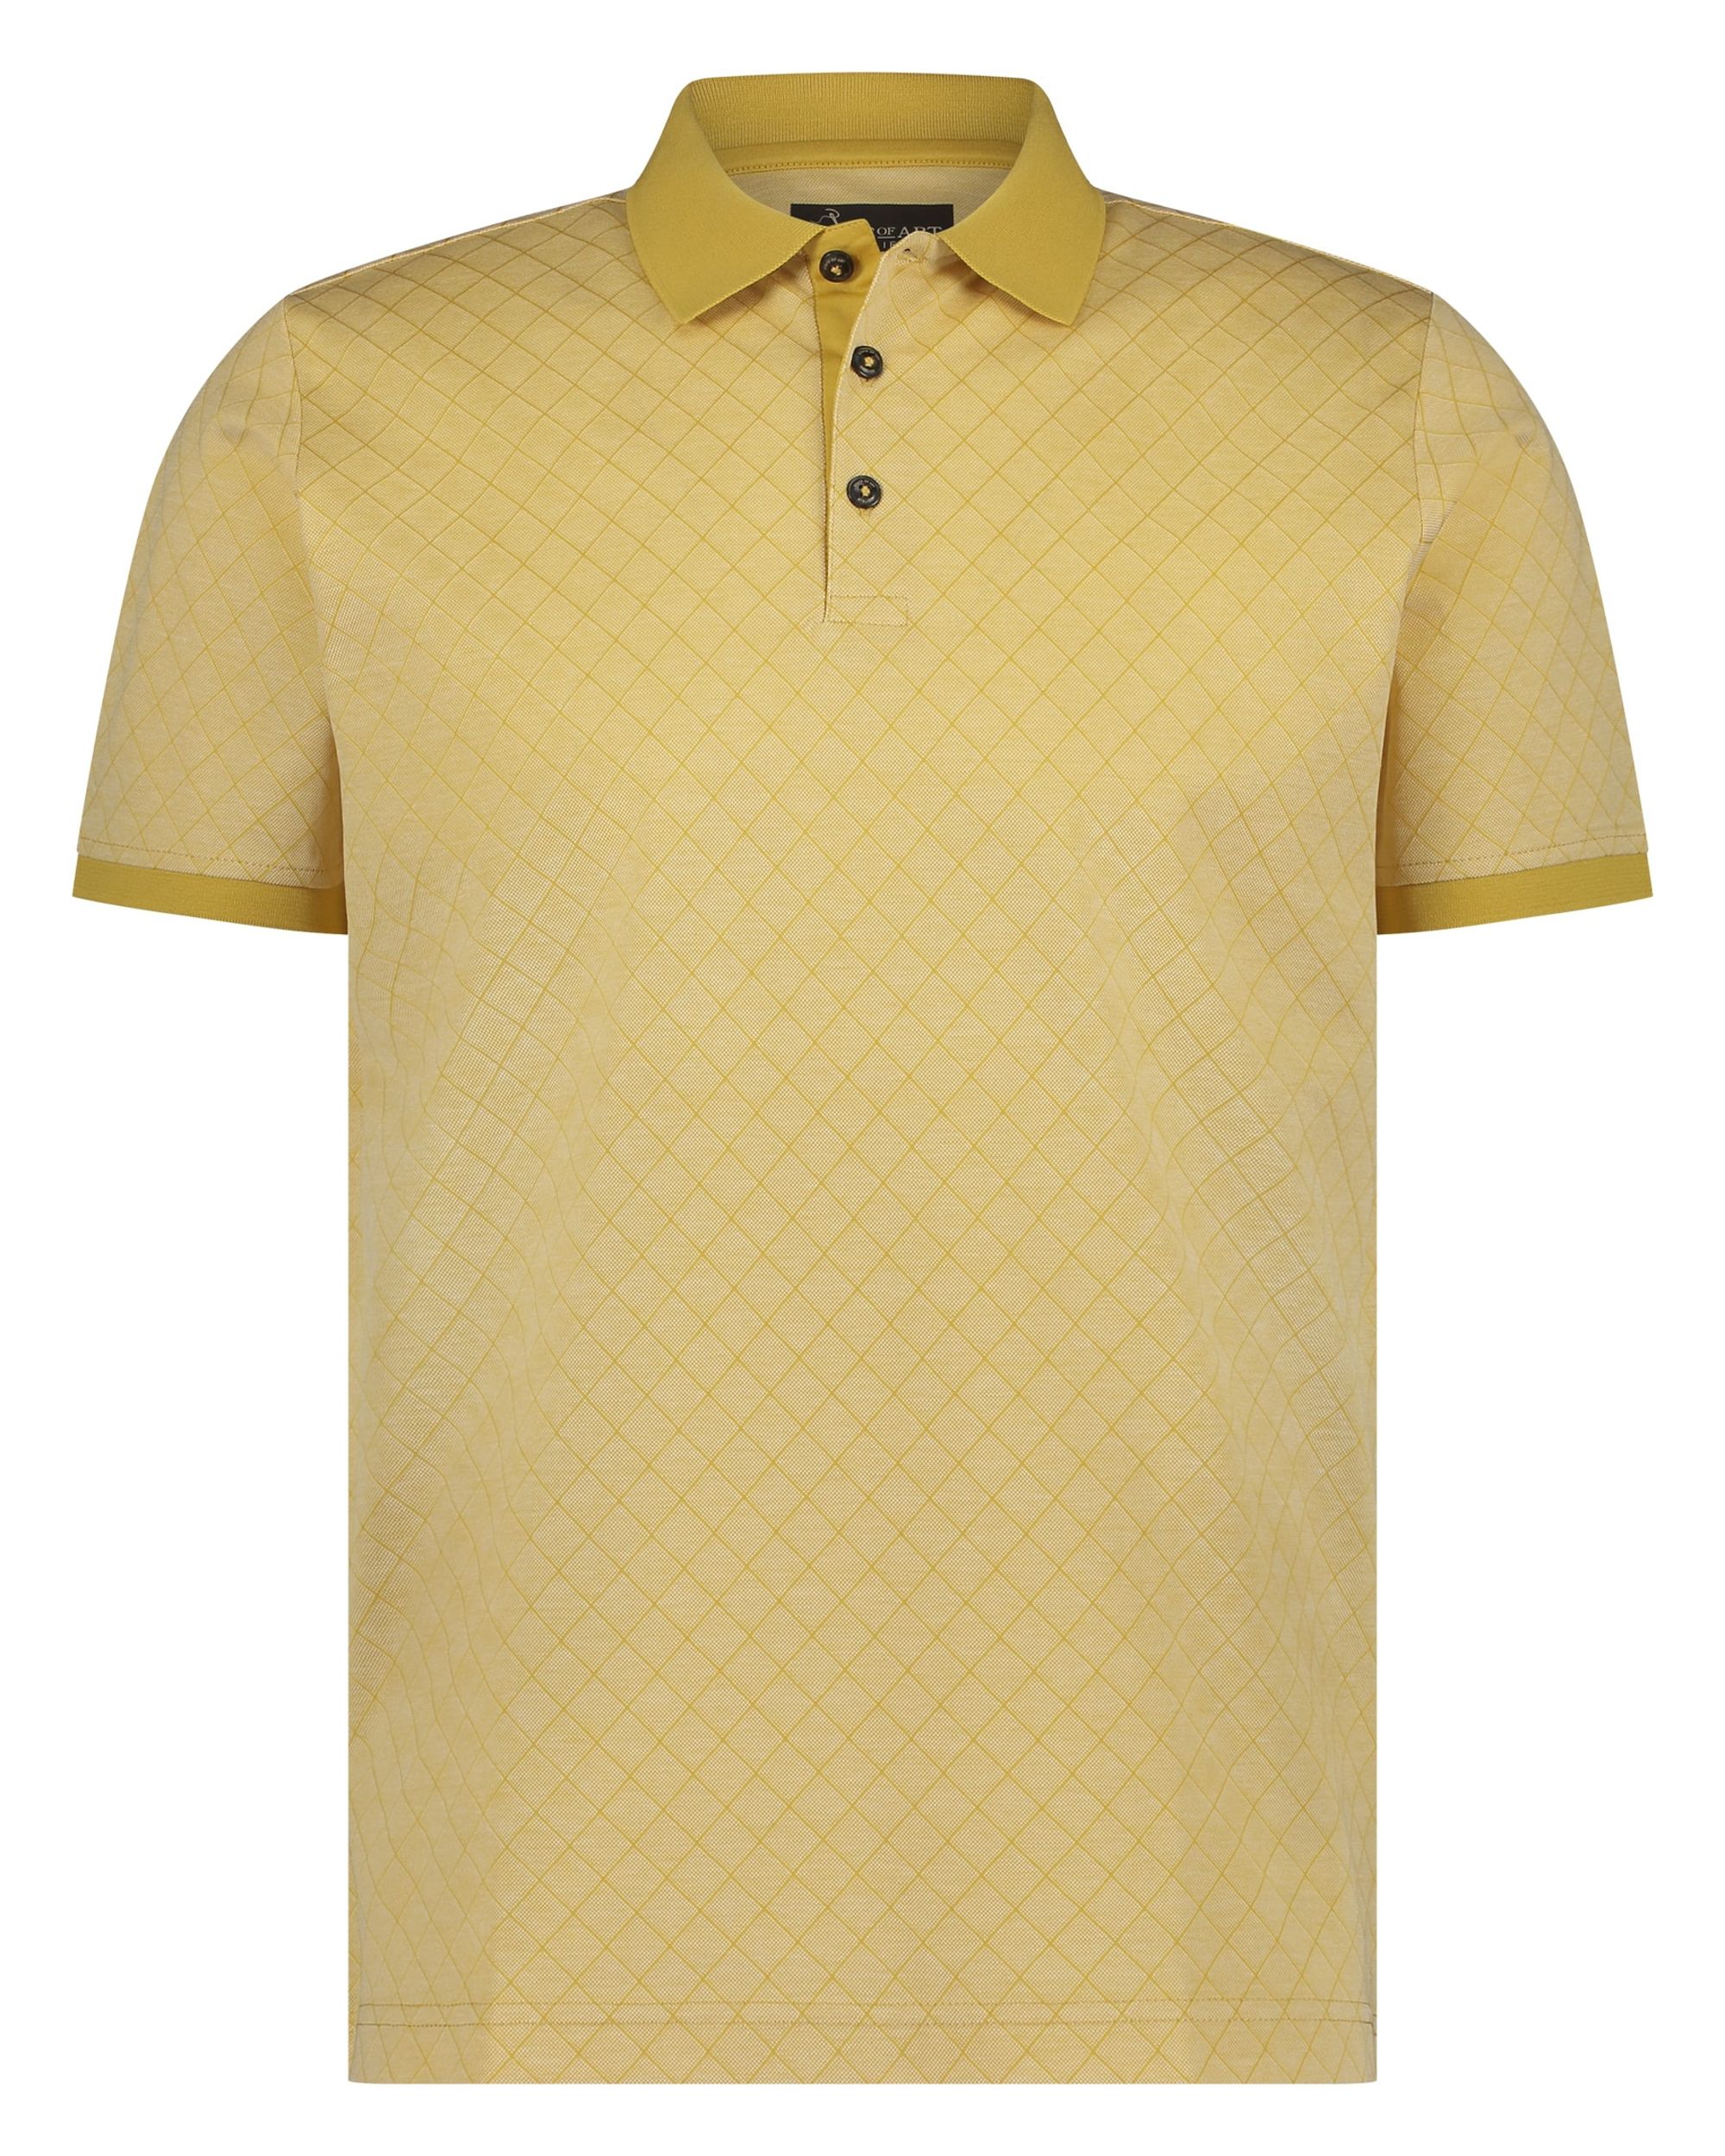 State of Art Polo KM Geel 095069-001-4XL